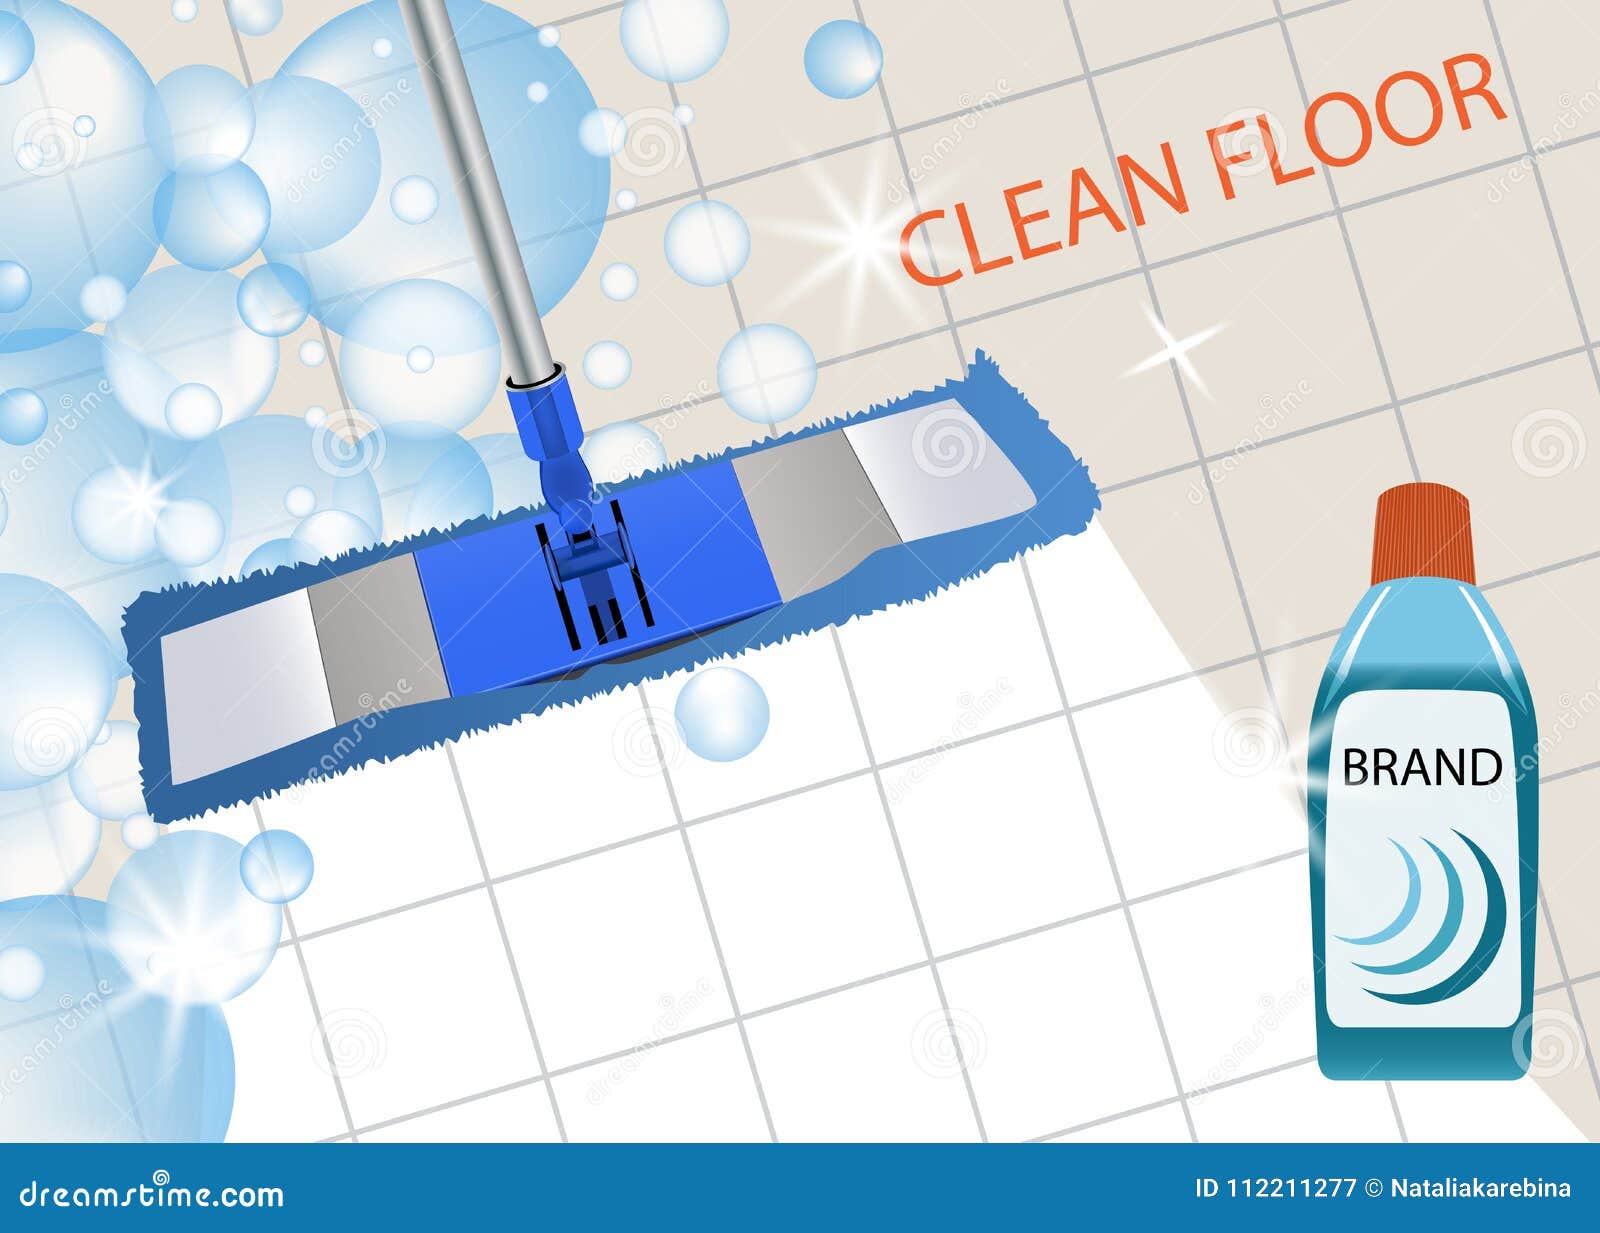 Mop Cleaning Clean Floor Shiny. Disinfectant Cleaner for Washing Floors  Stock Vector - Illustration of blue, background: 112211277